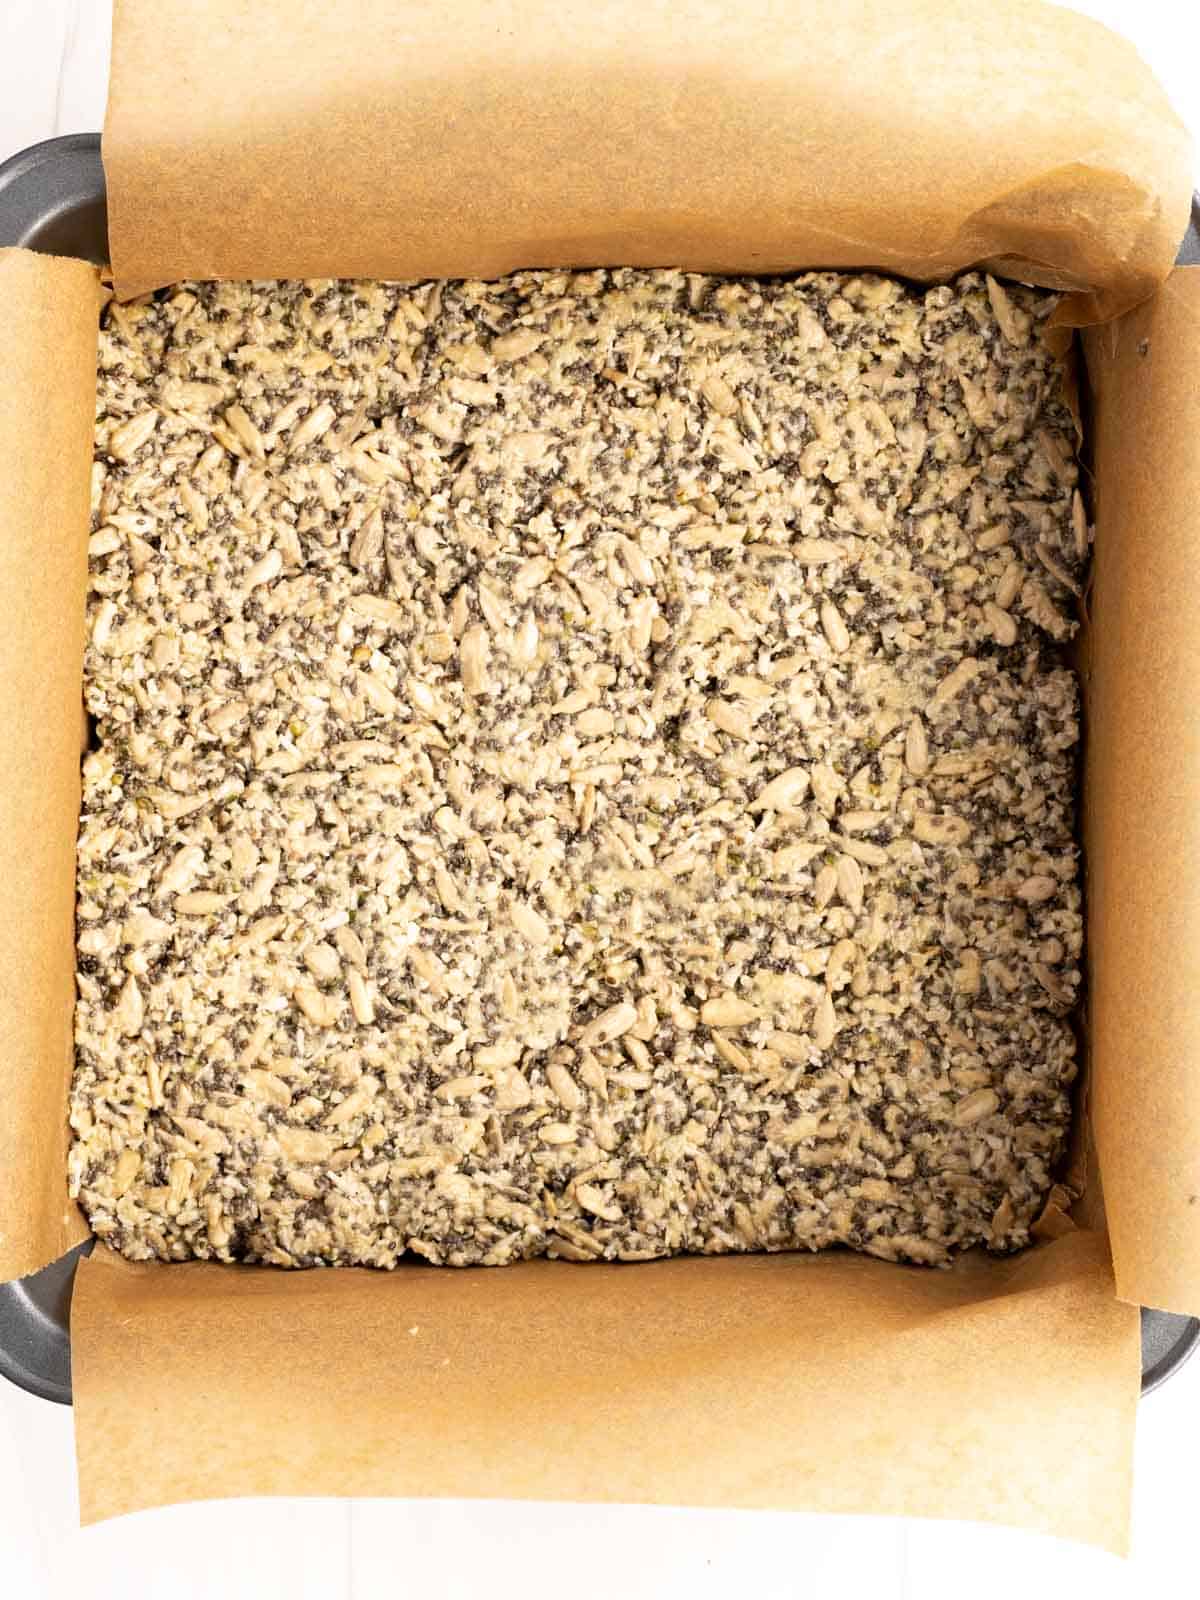 Energy snack and seed bar ingredients pressed into an 8x8-inch parchment lined pan.